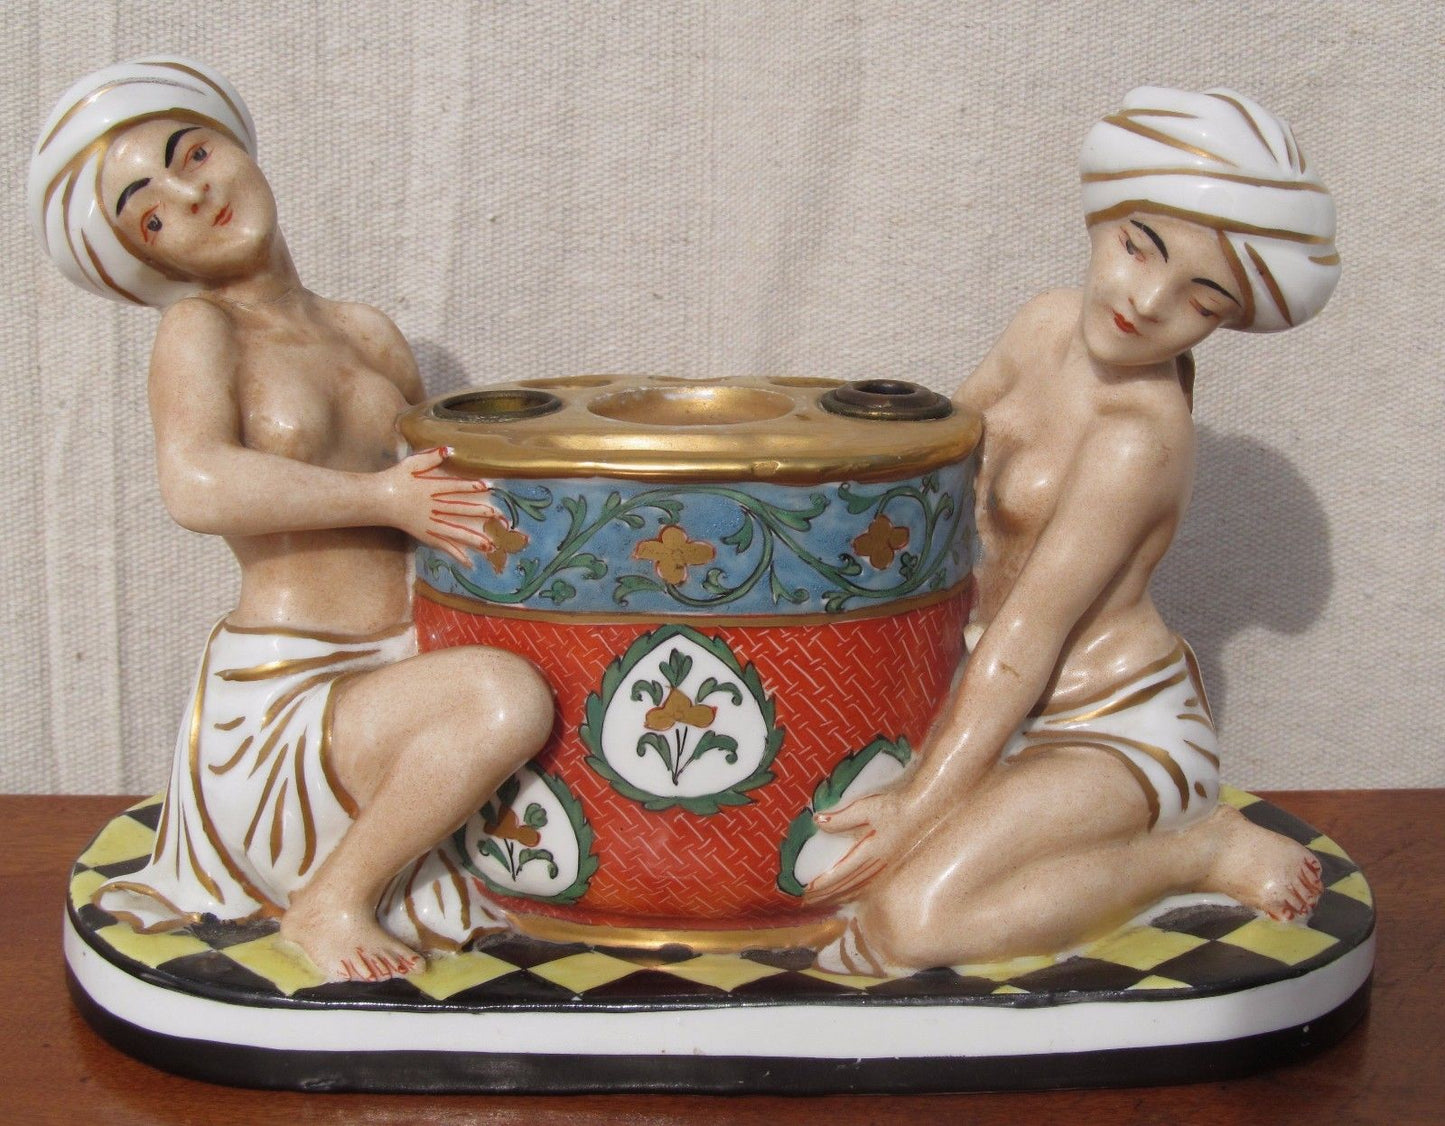 ANTIQUE ART NOUVEAU INKWELL WITH PERSIAN HAREM FIGURES